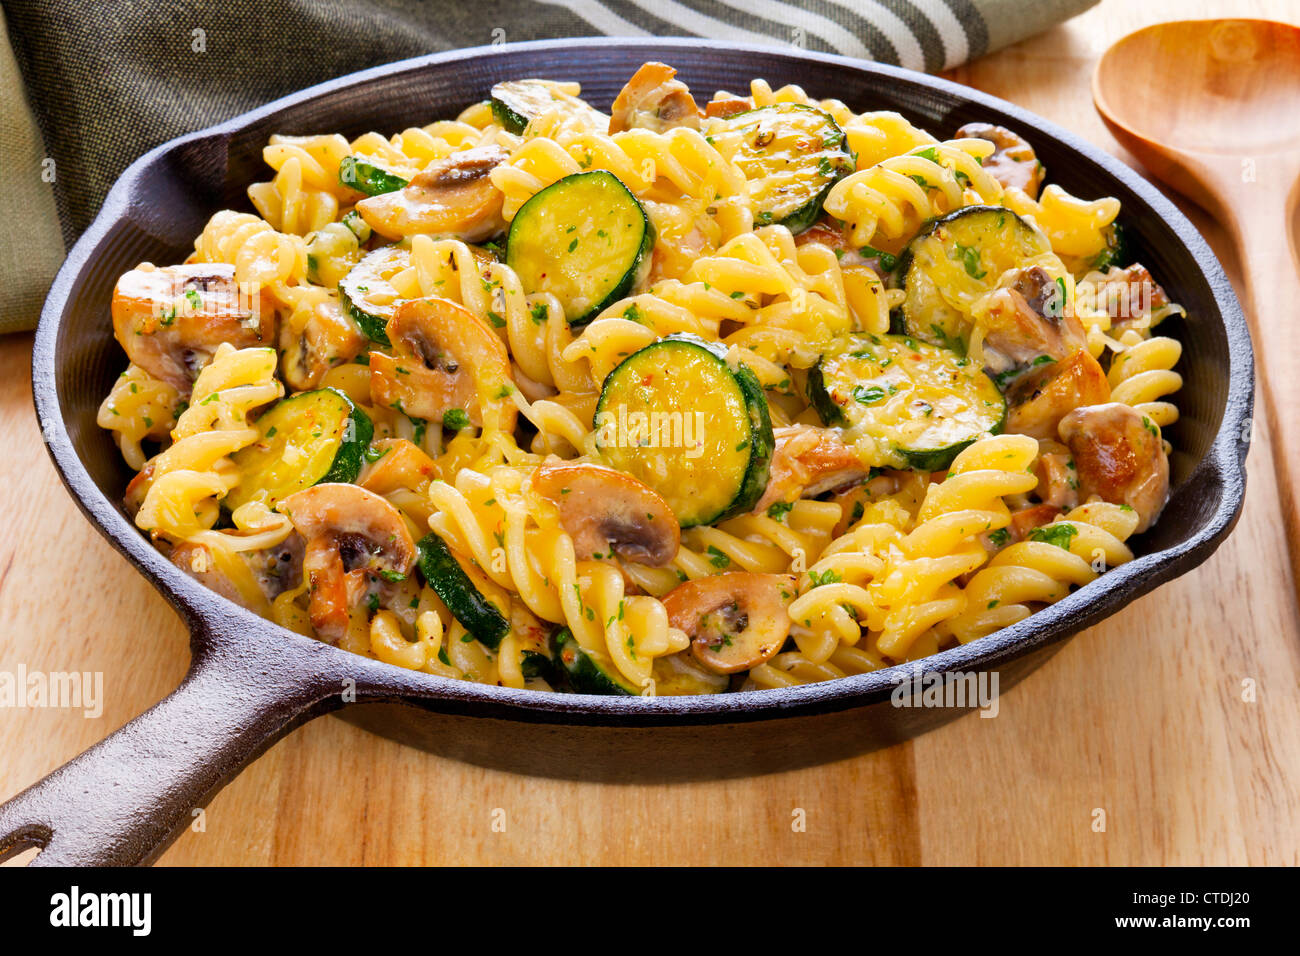 Fusili pasta baked with mushrooms and zucchini in a cream sauce with parmesan, mozzarella and fesh herbs. Stock Photo